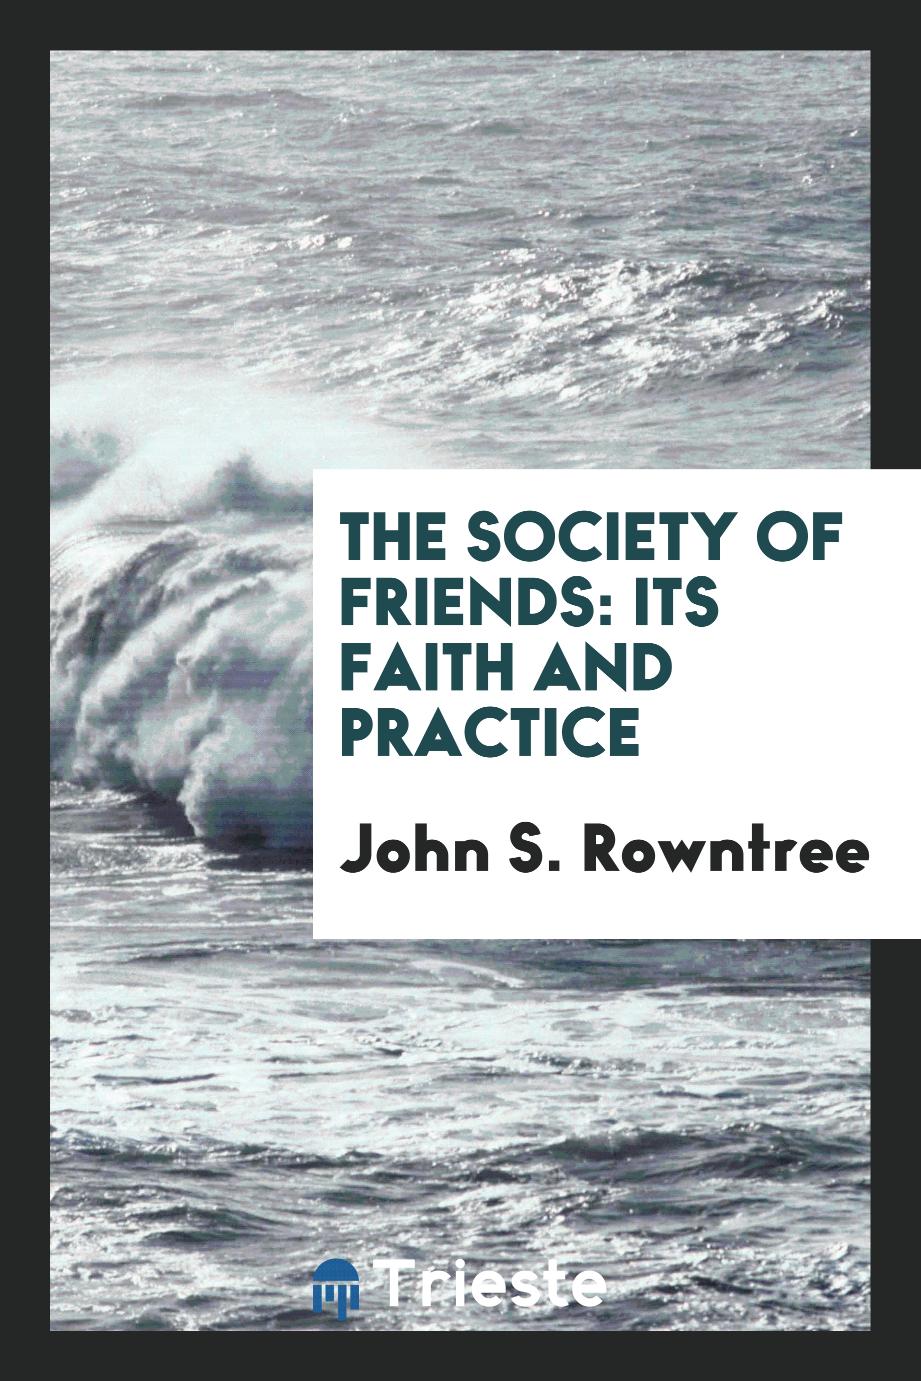 The Society of Friends: Its Faith and Practice